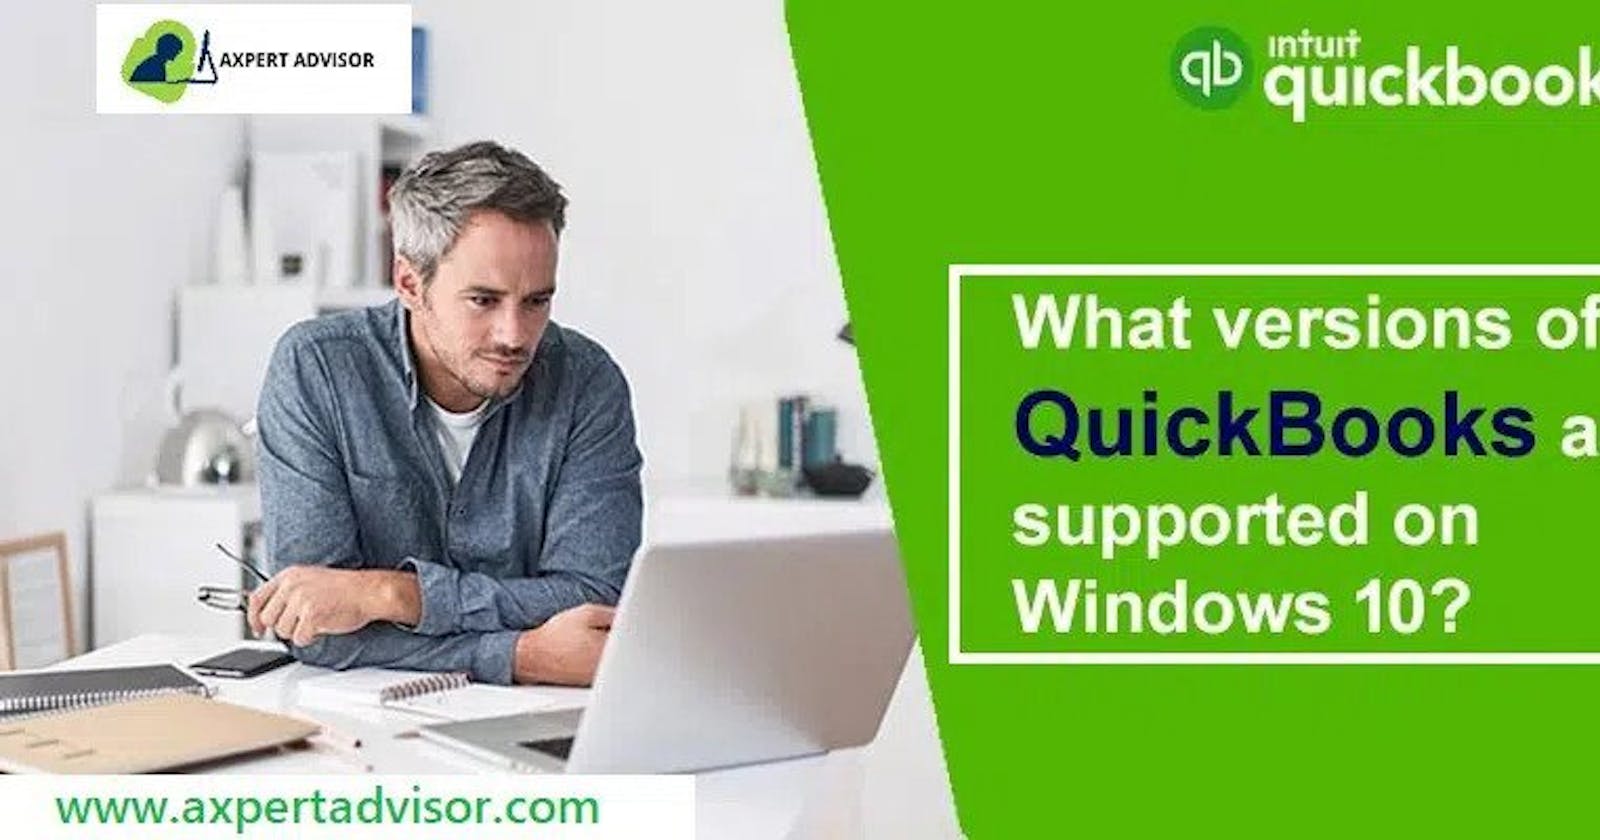 Quickbooks versions that are supported by windows 10